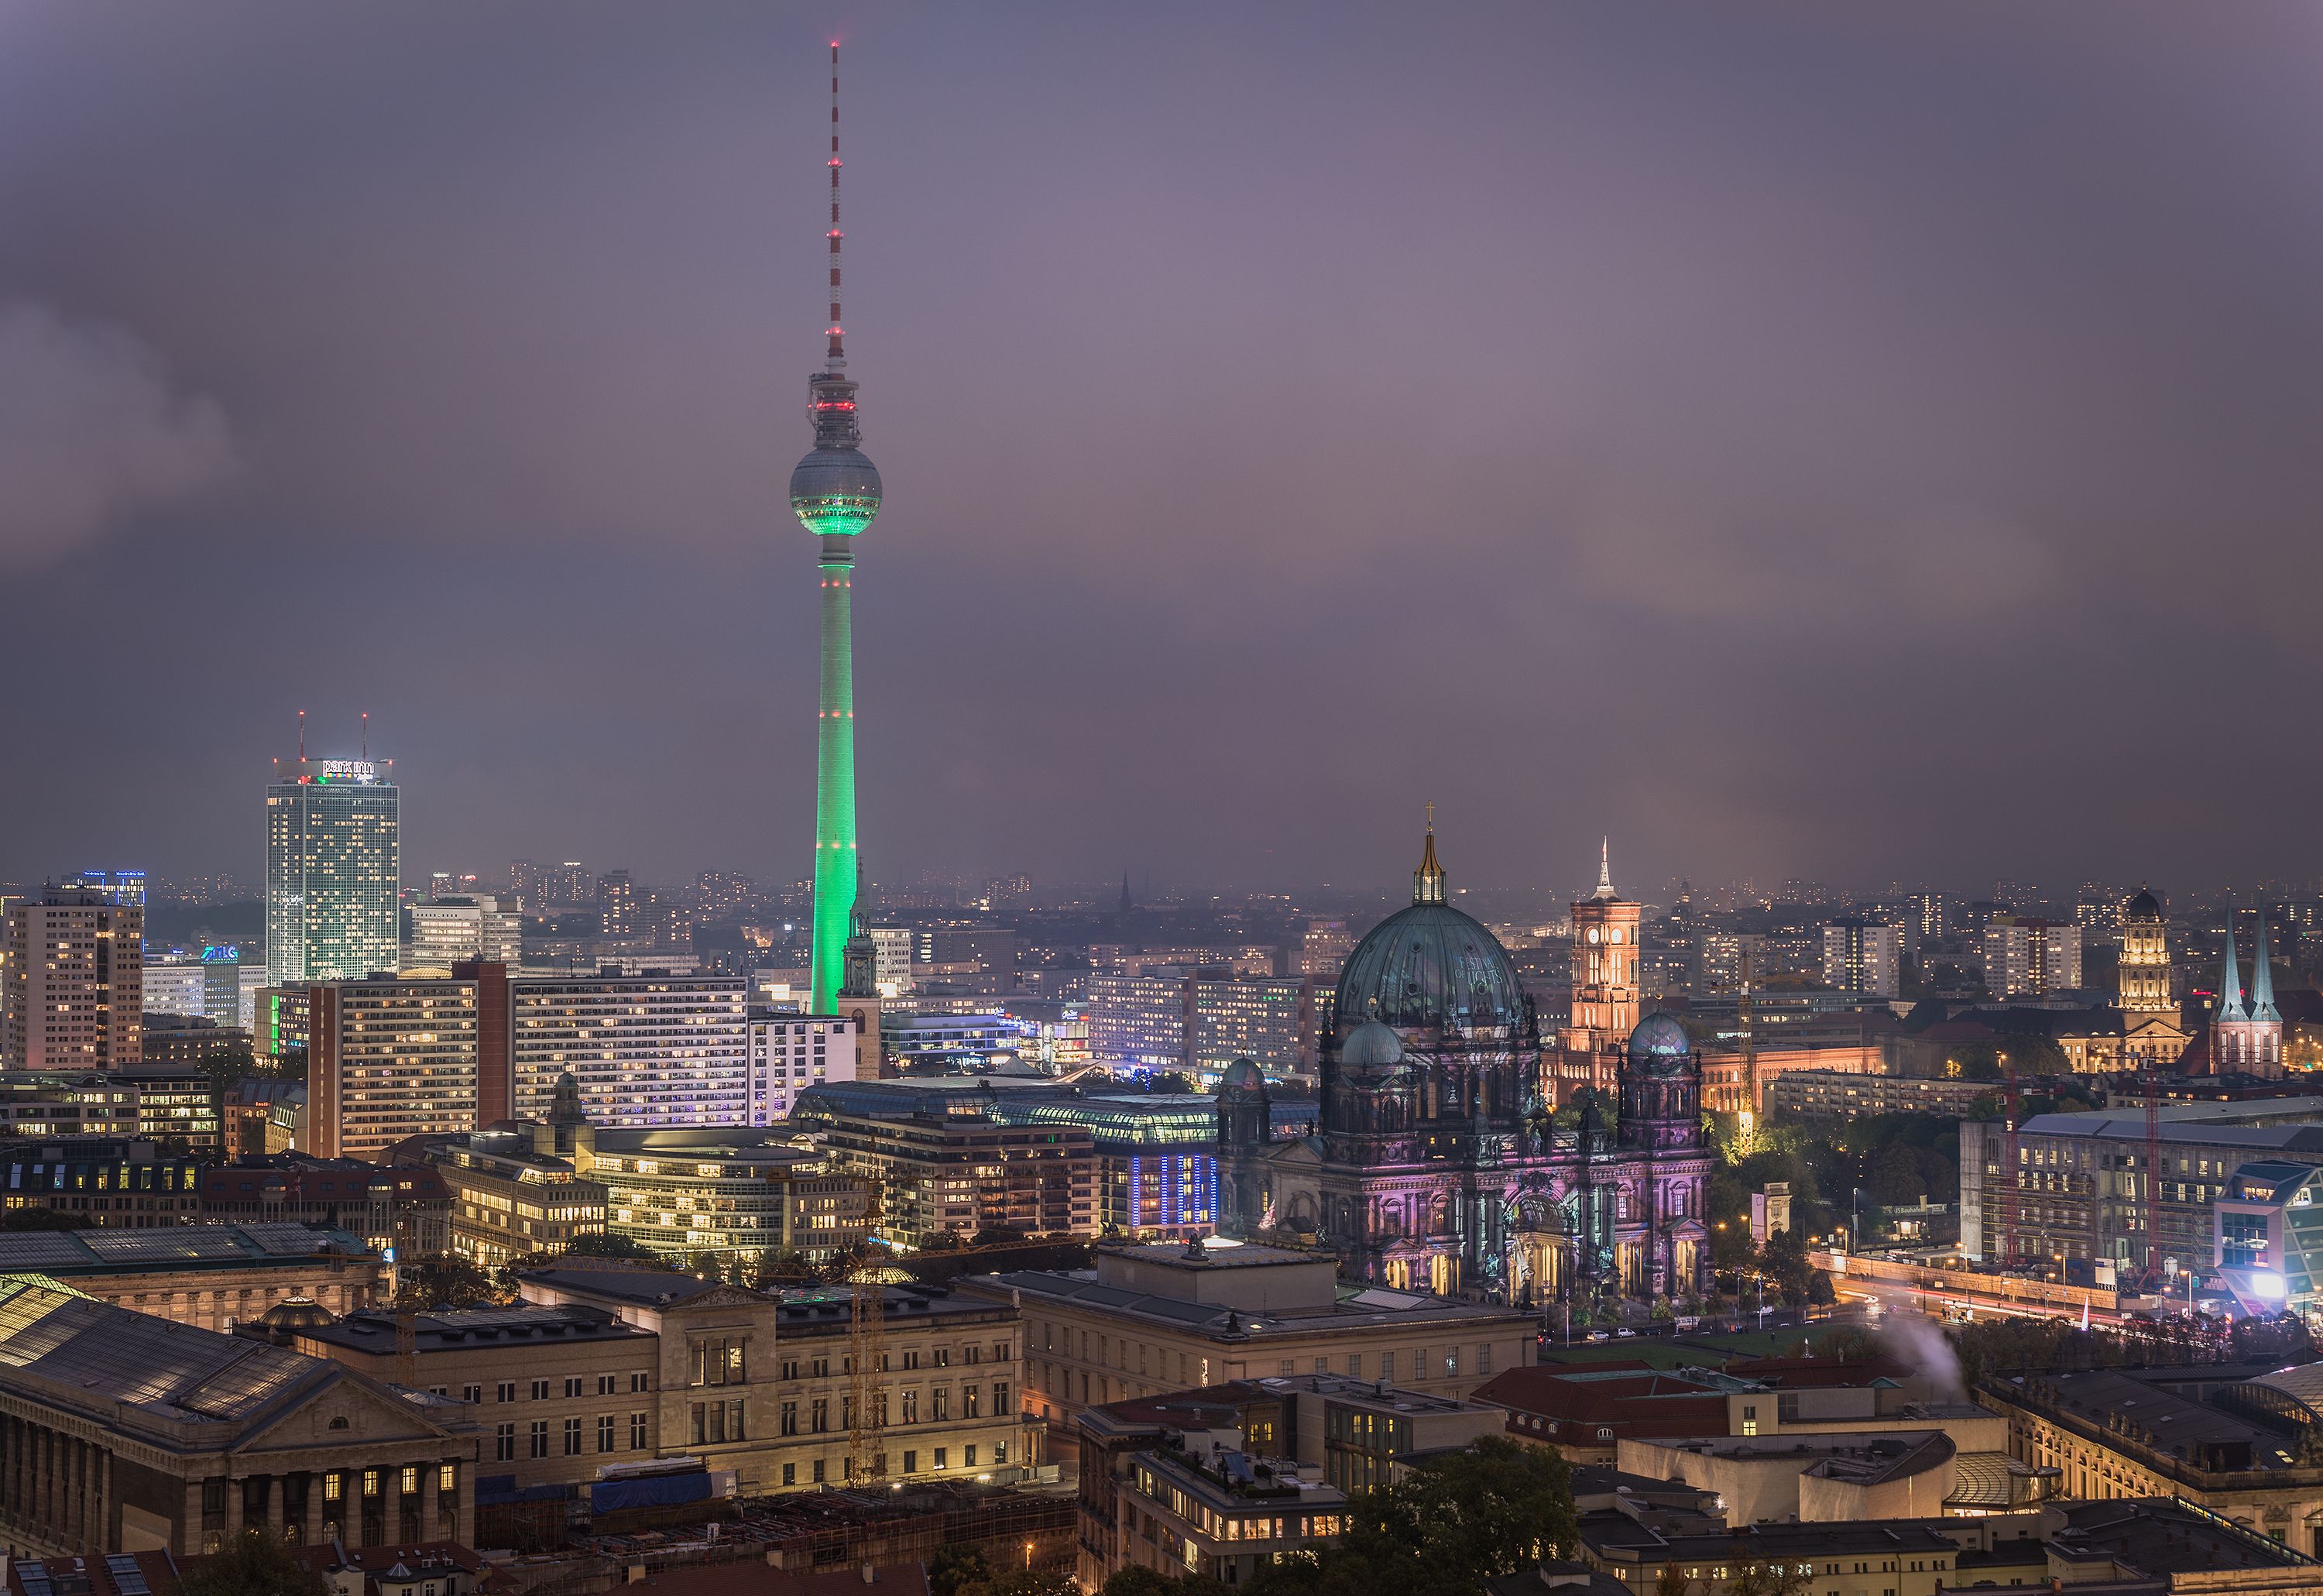 berlin, germany, europe, man made, architecture, cathedral, city, cloud, light, night, sky, skyline, cities